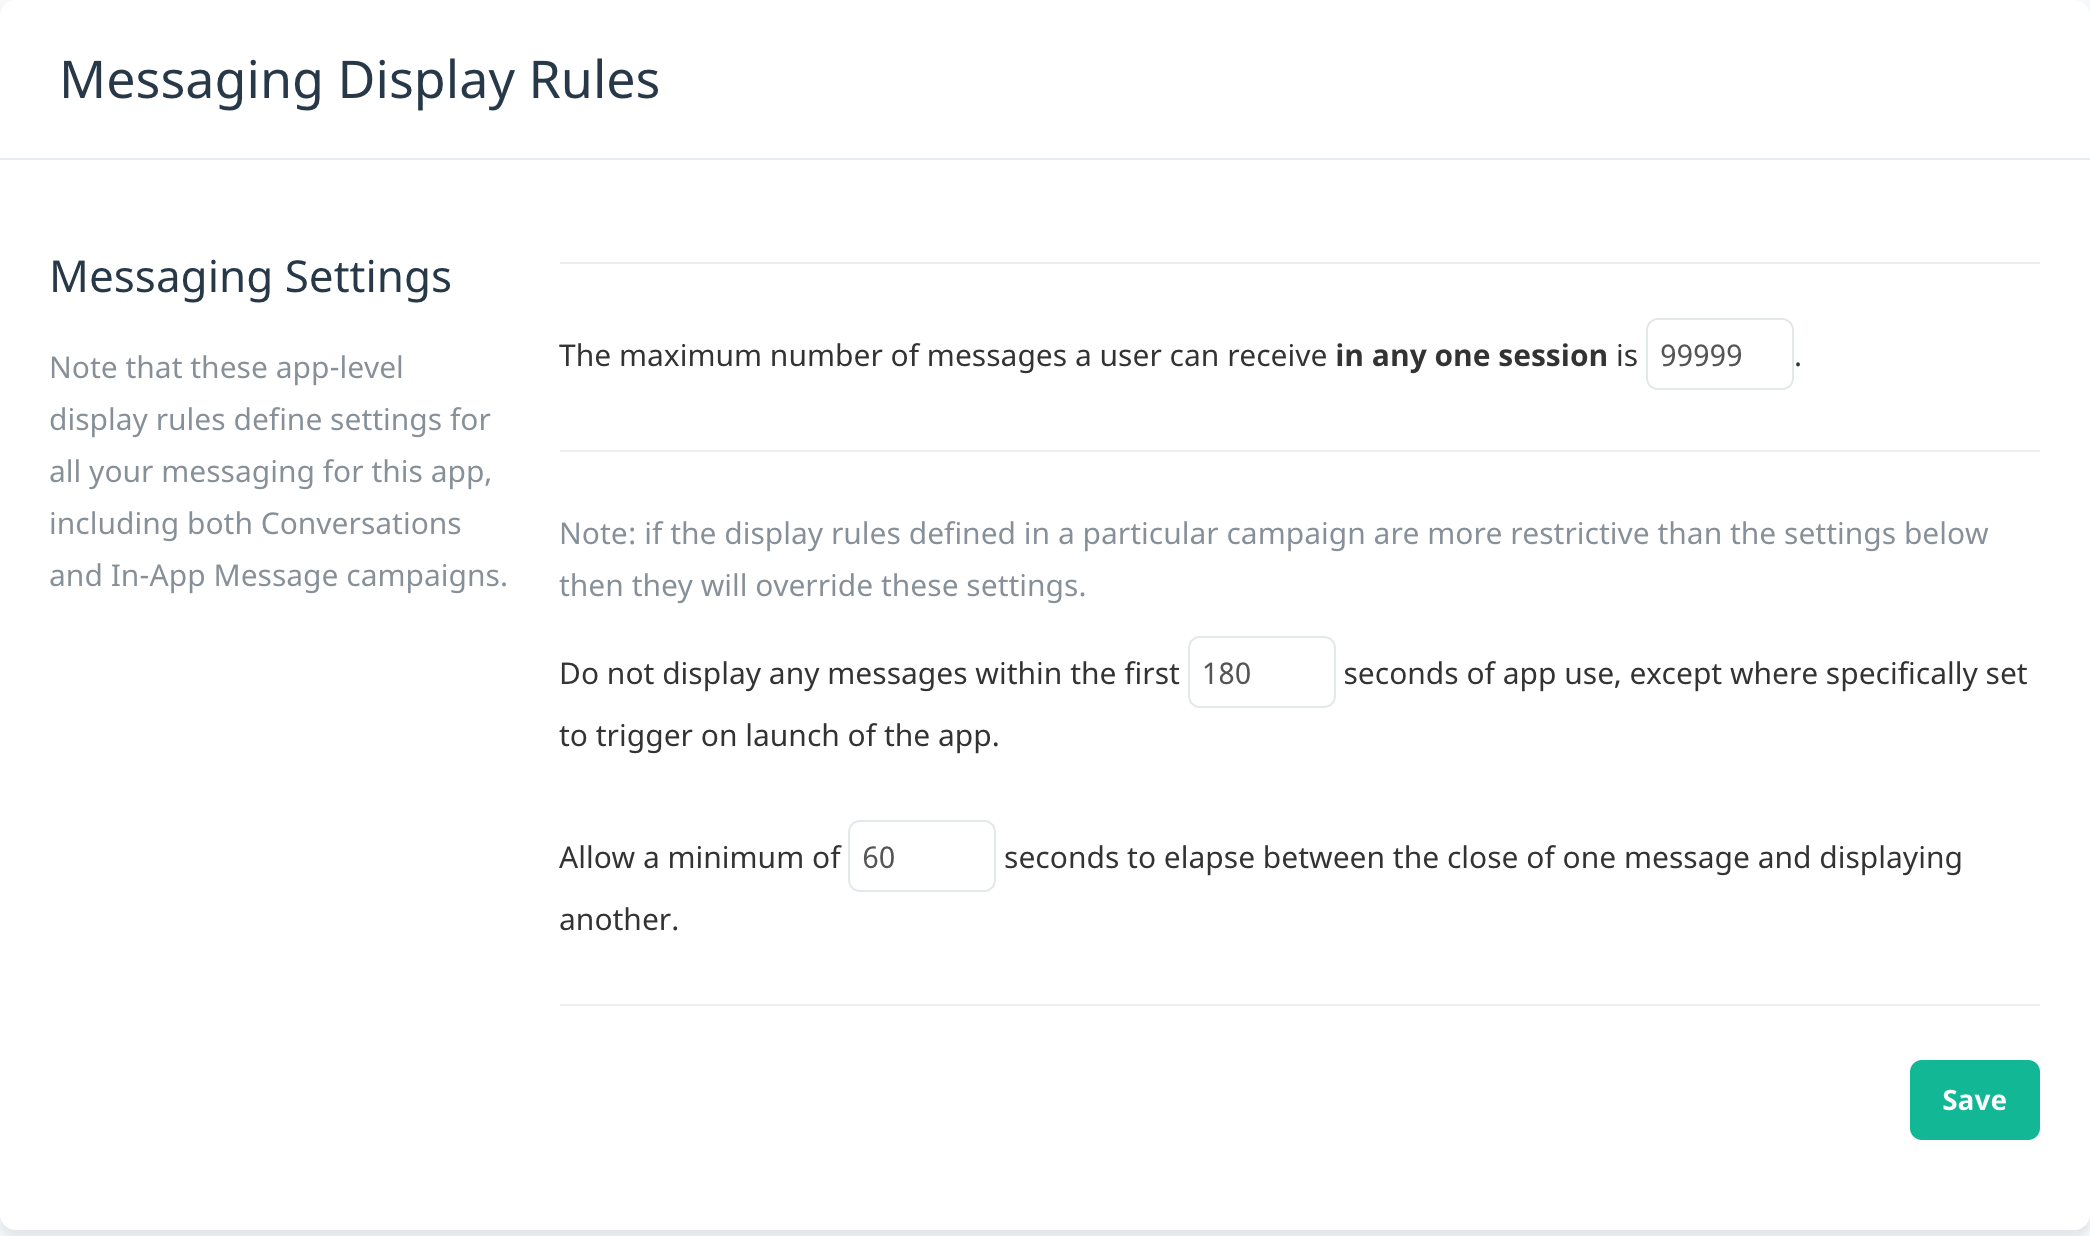 App level message display rules for in-app message and Conversation campaigns.